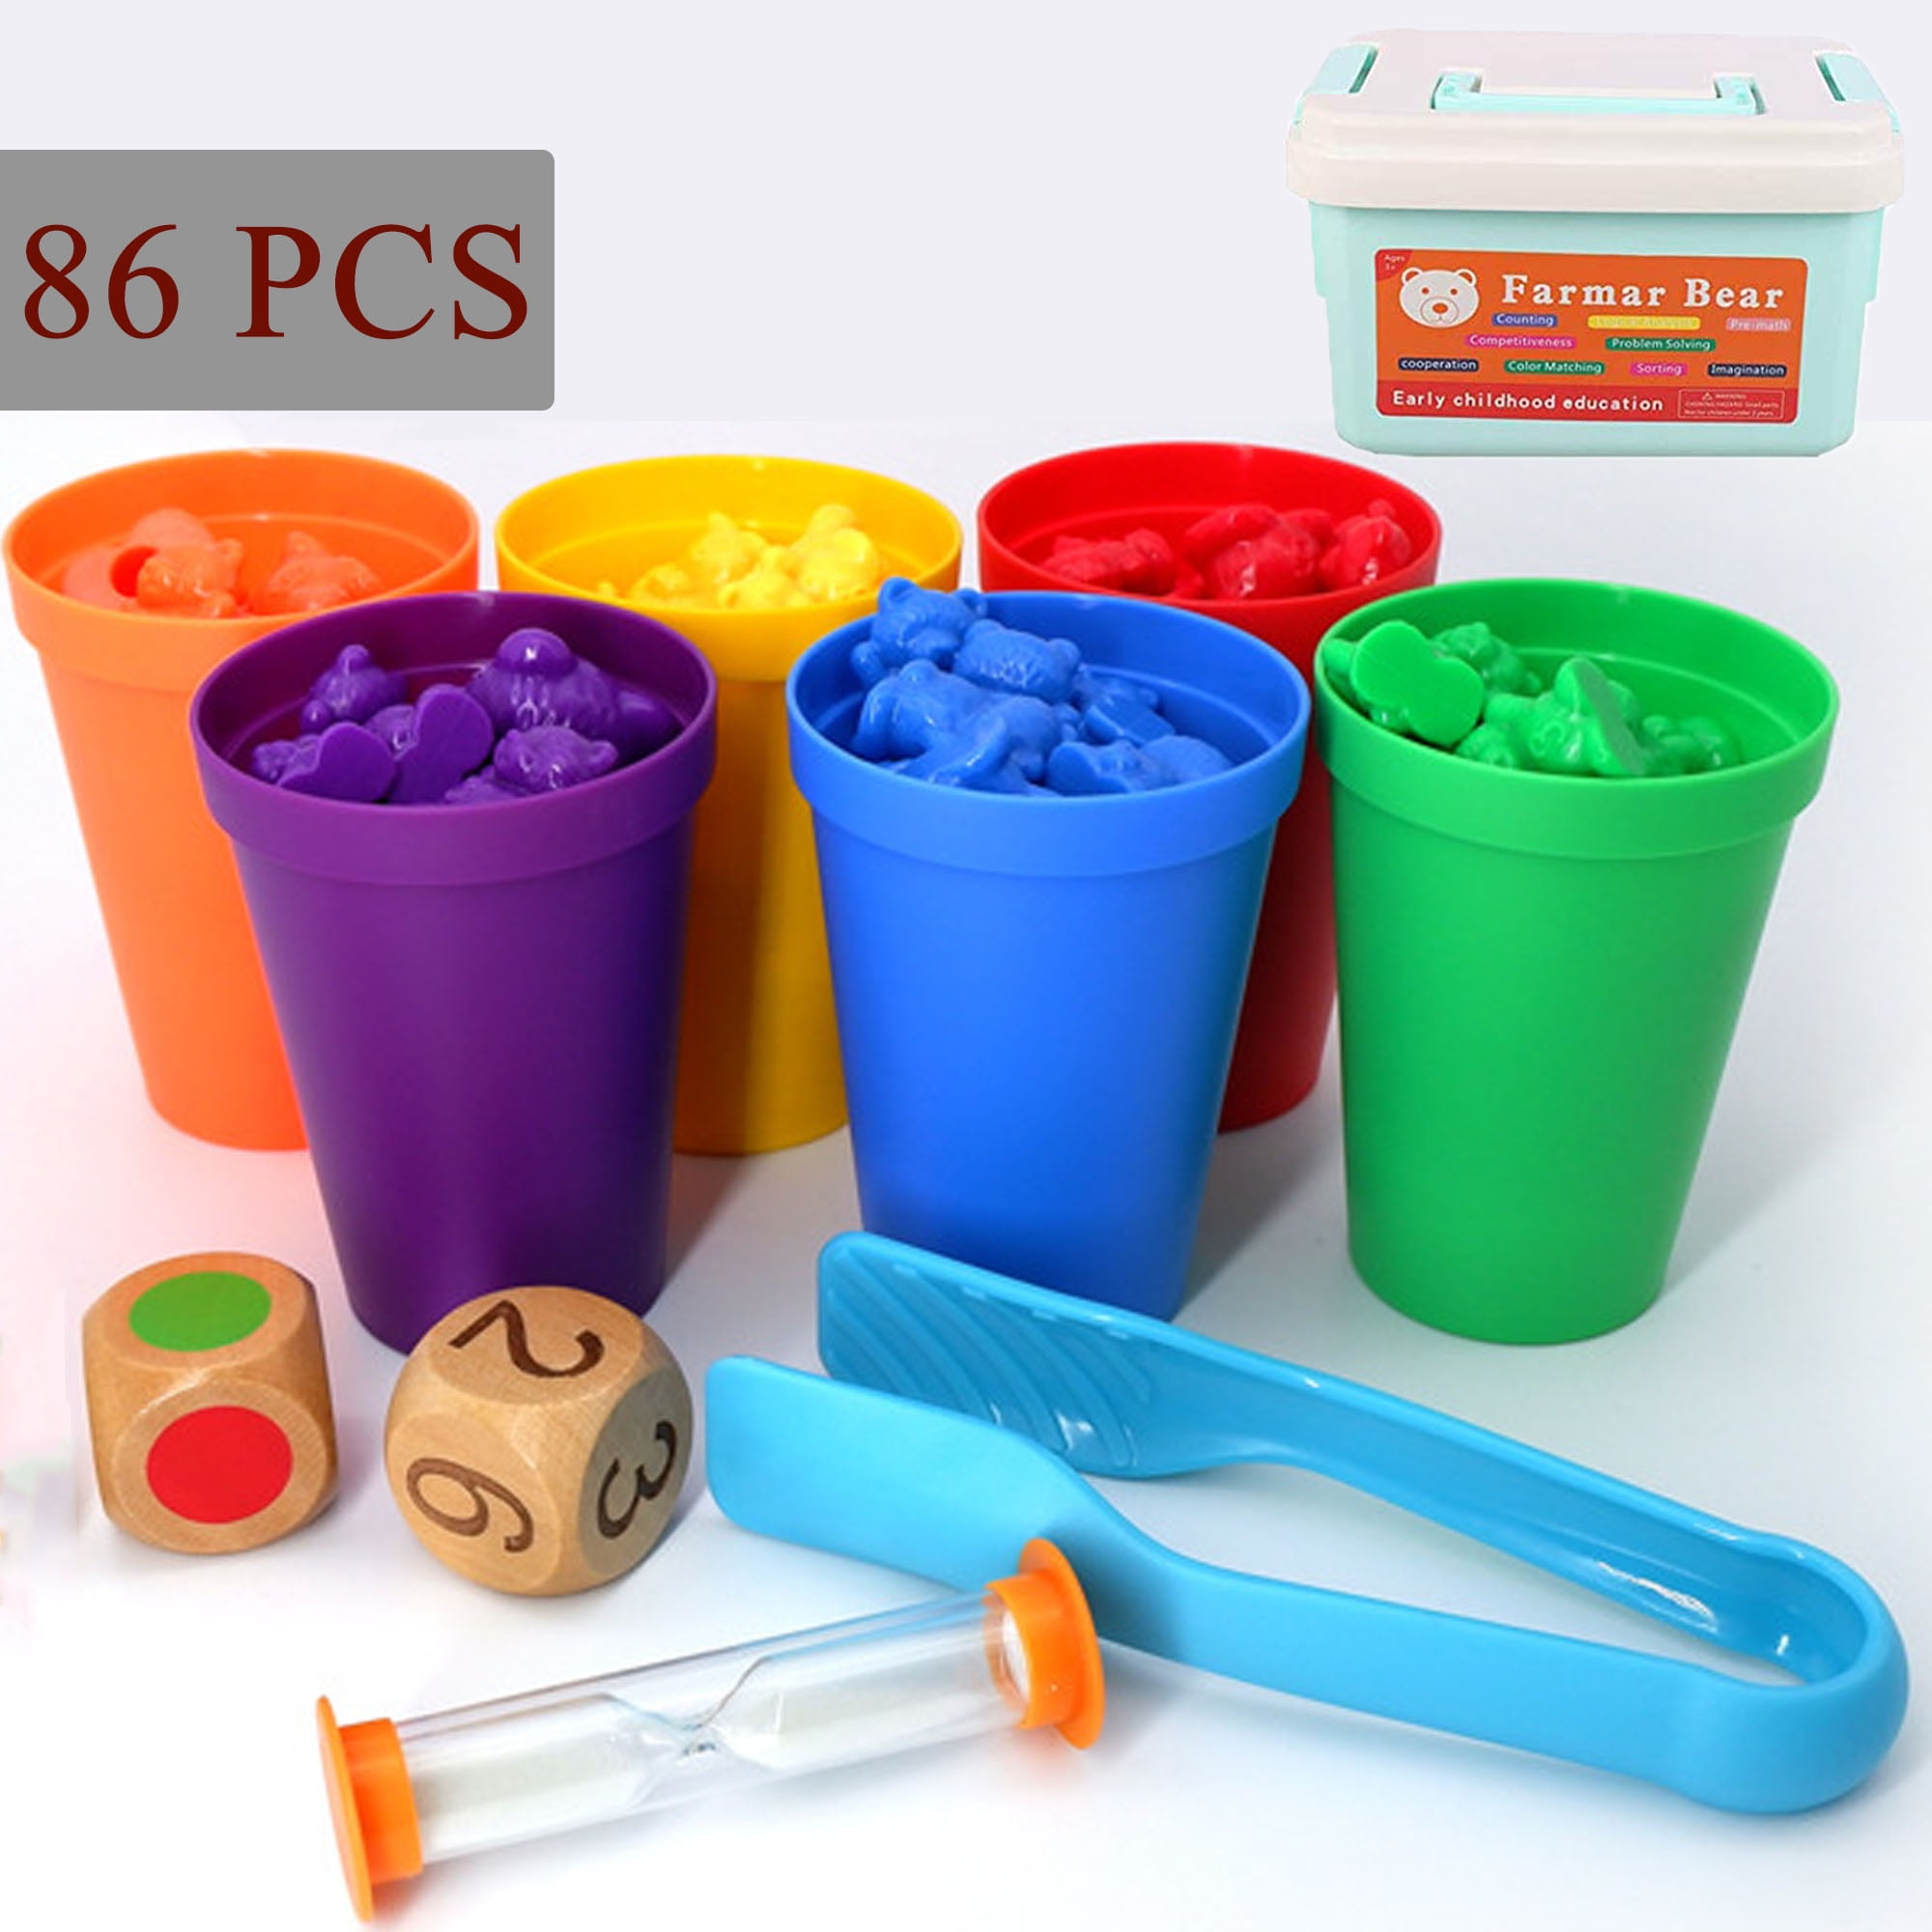 Moulty Counting Bears with Stacking Cups Montessori Educational Sorting  Rainbow Toys For 3 Year Old Boys and Girls